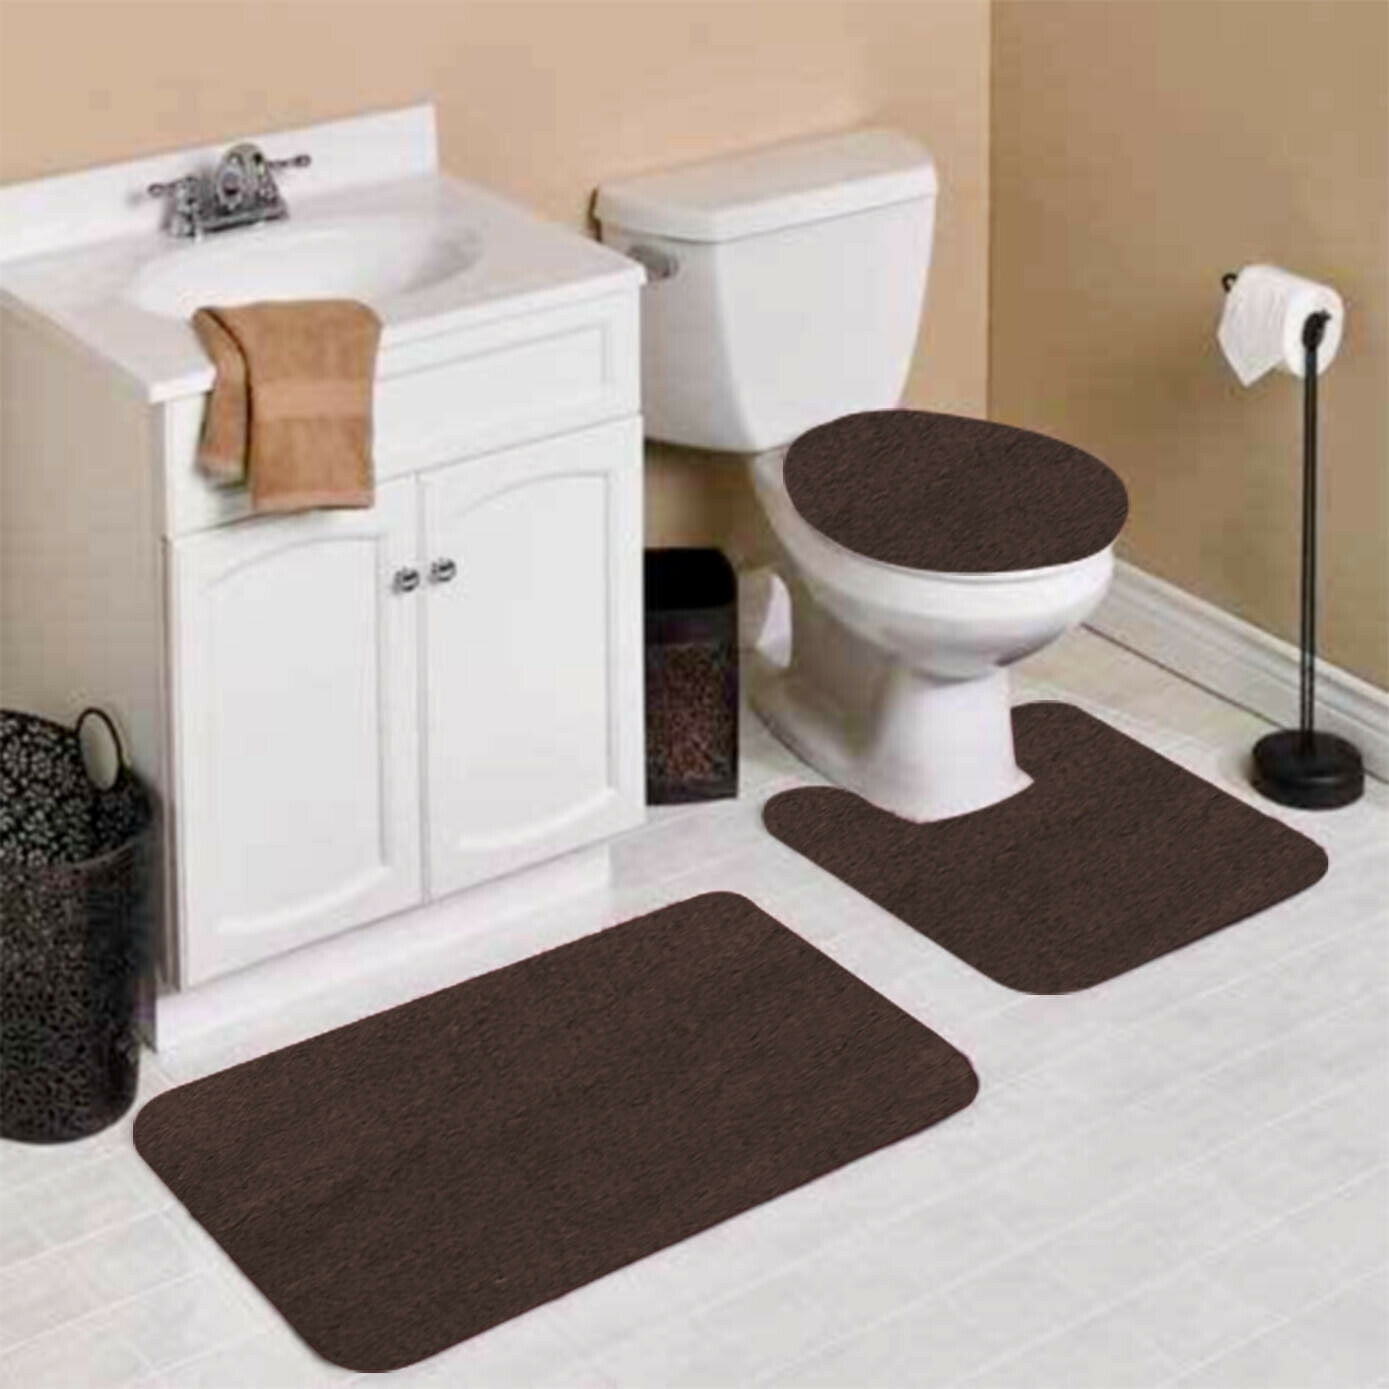 Bathroom Mat Rug With Lid Cover, Bathroom Mats And Rugs Sets